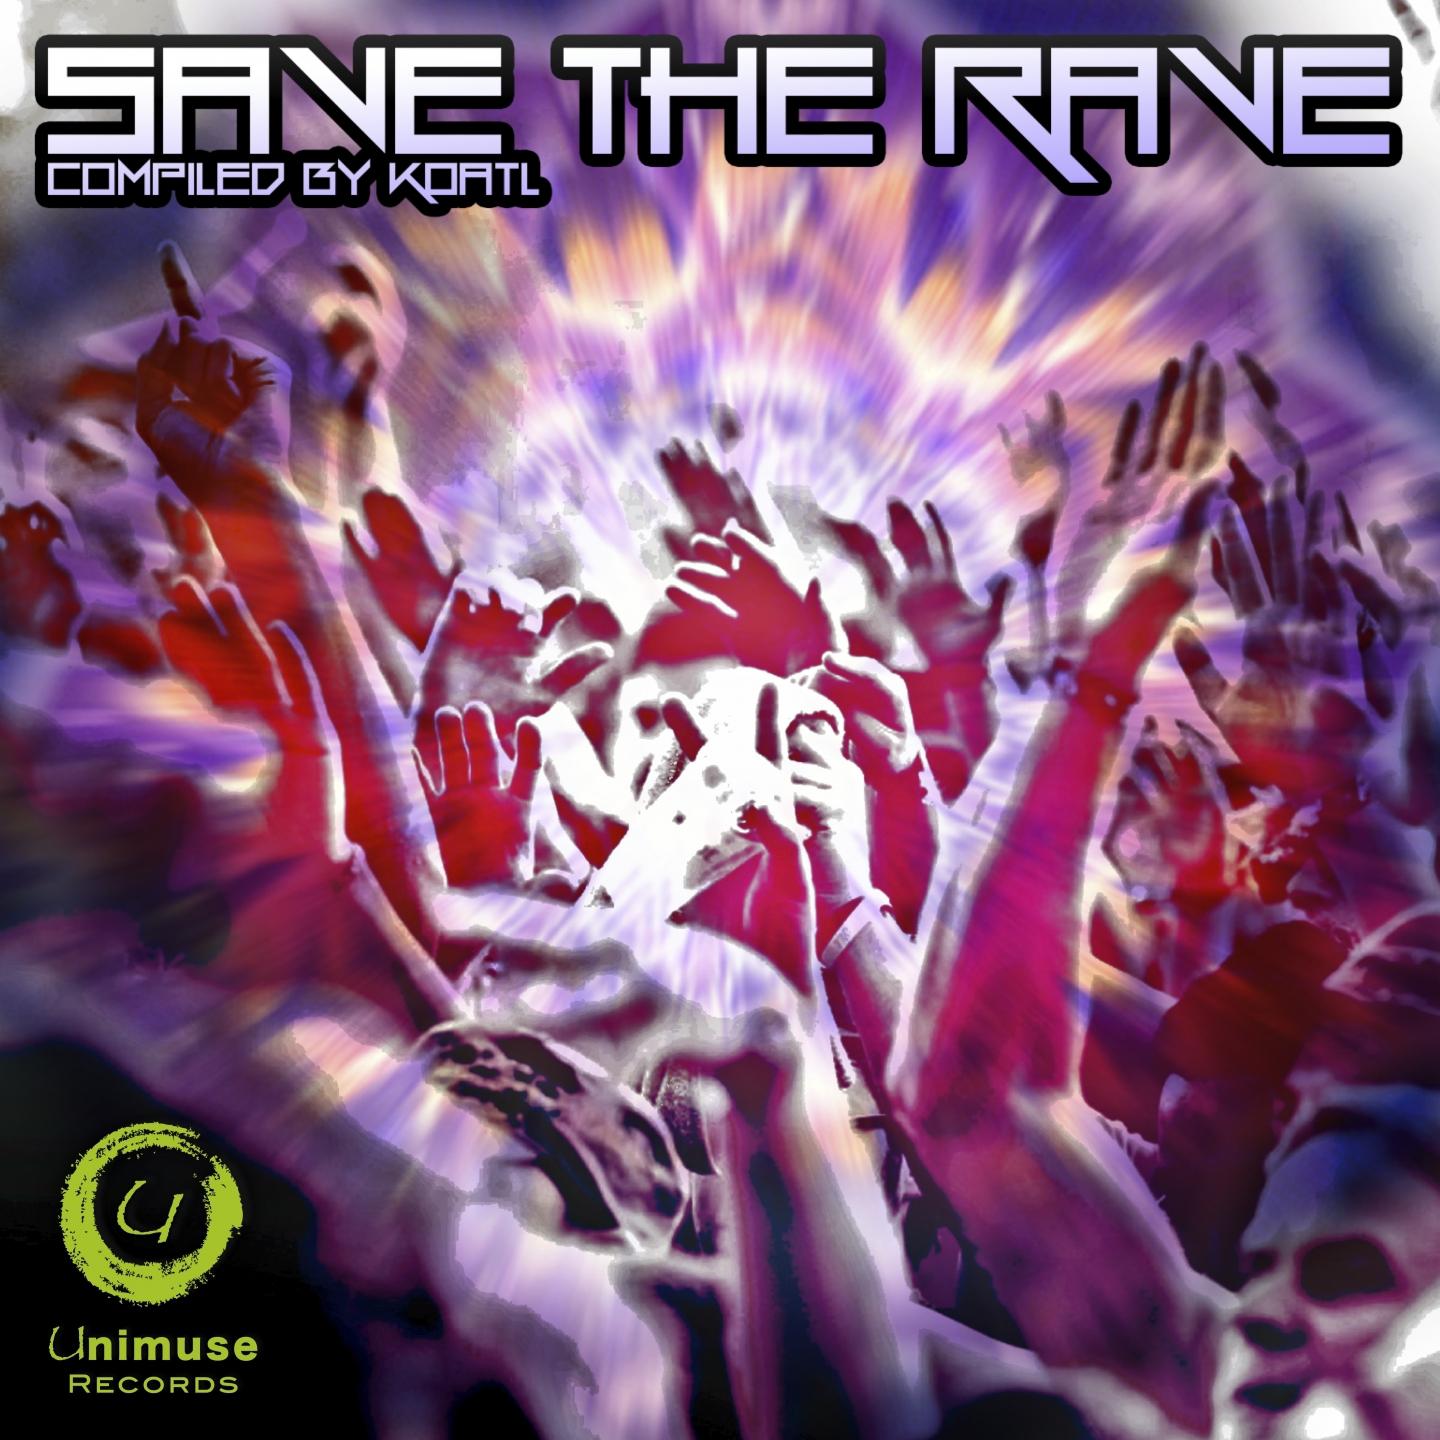 Save the Rave